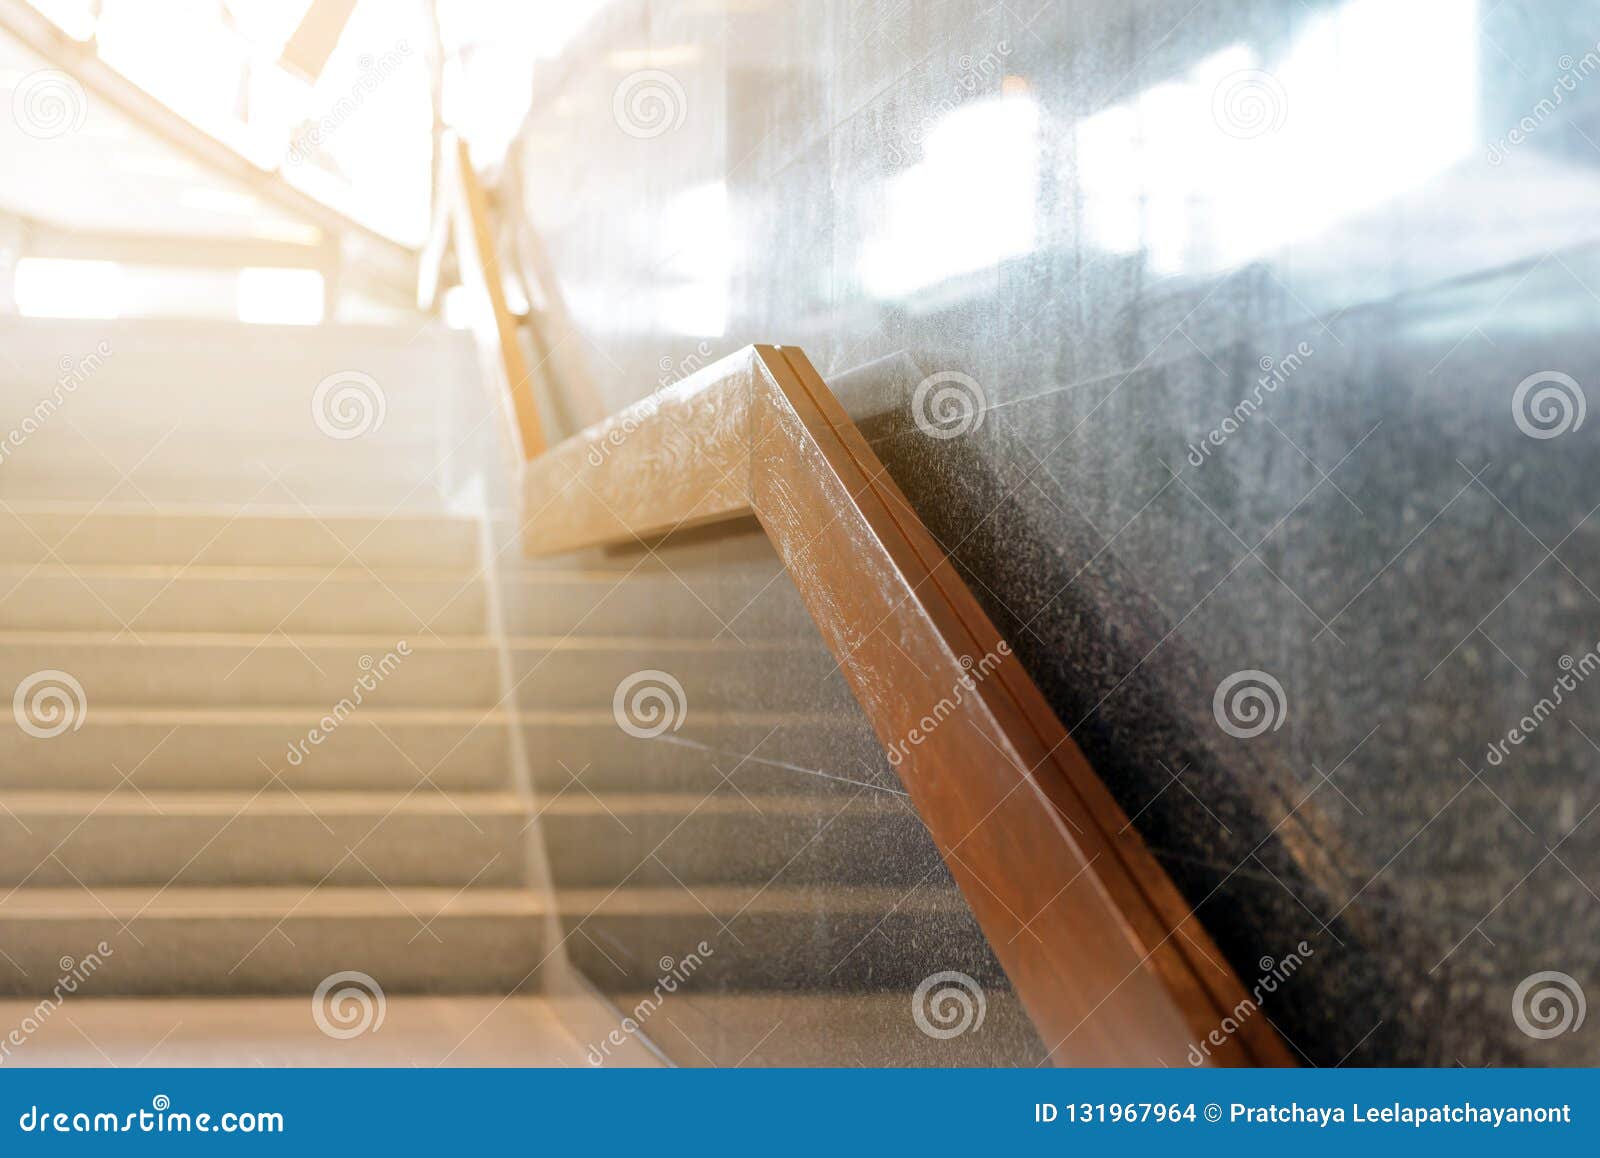 Marble Stairs With Wooden Handrail In Building For Step Up